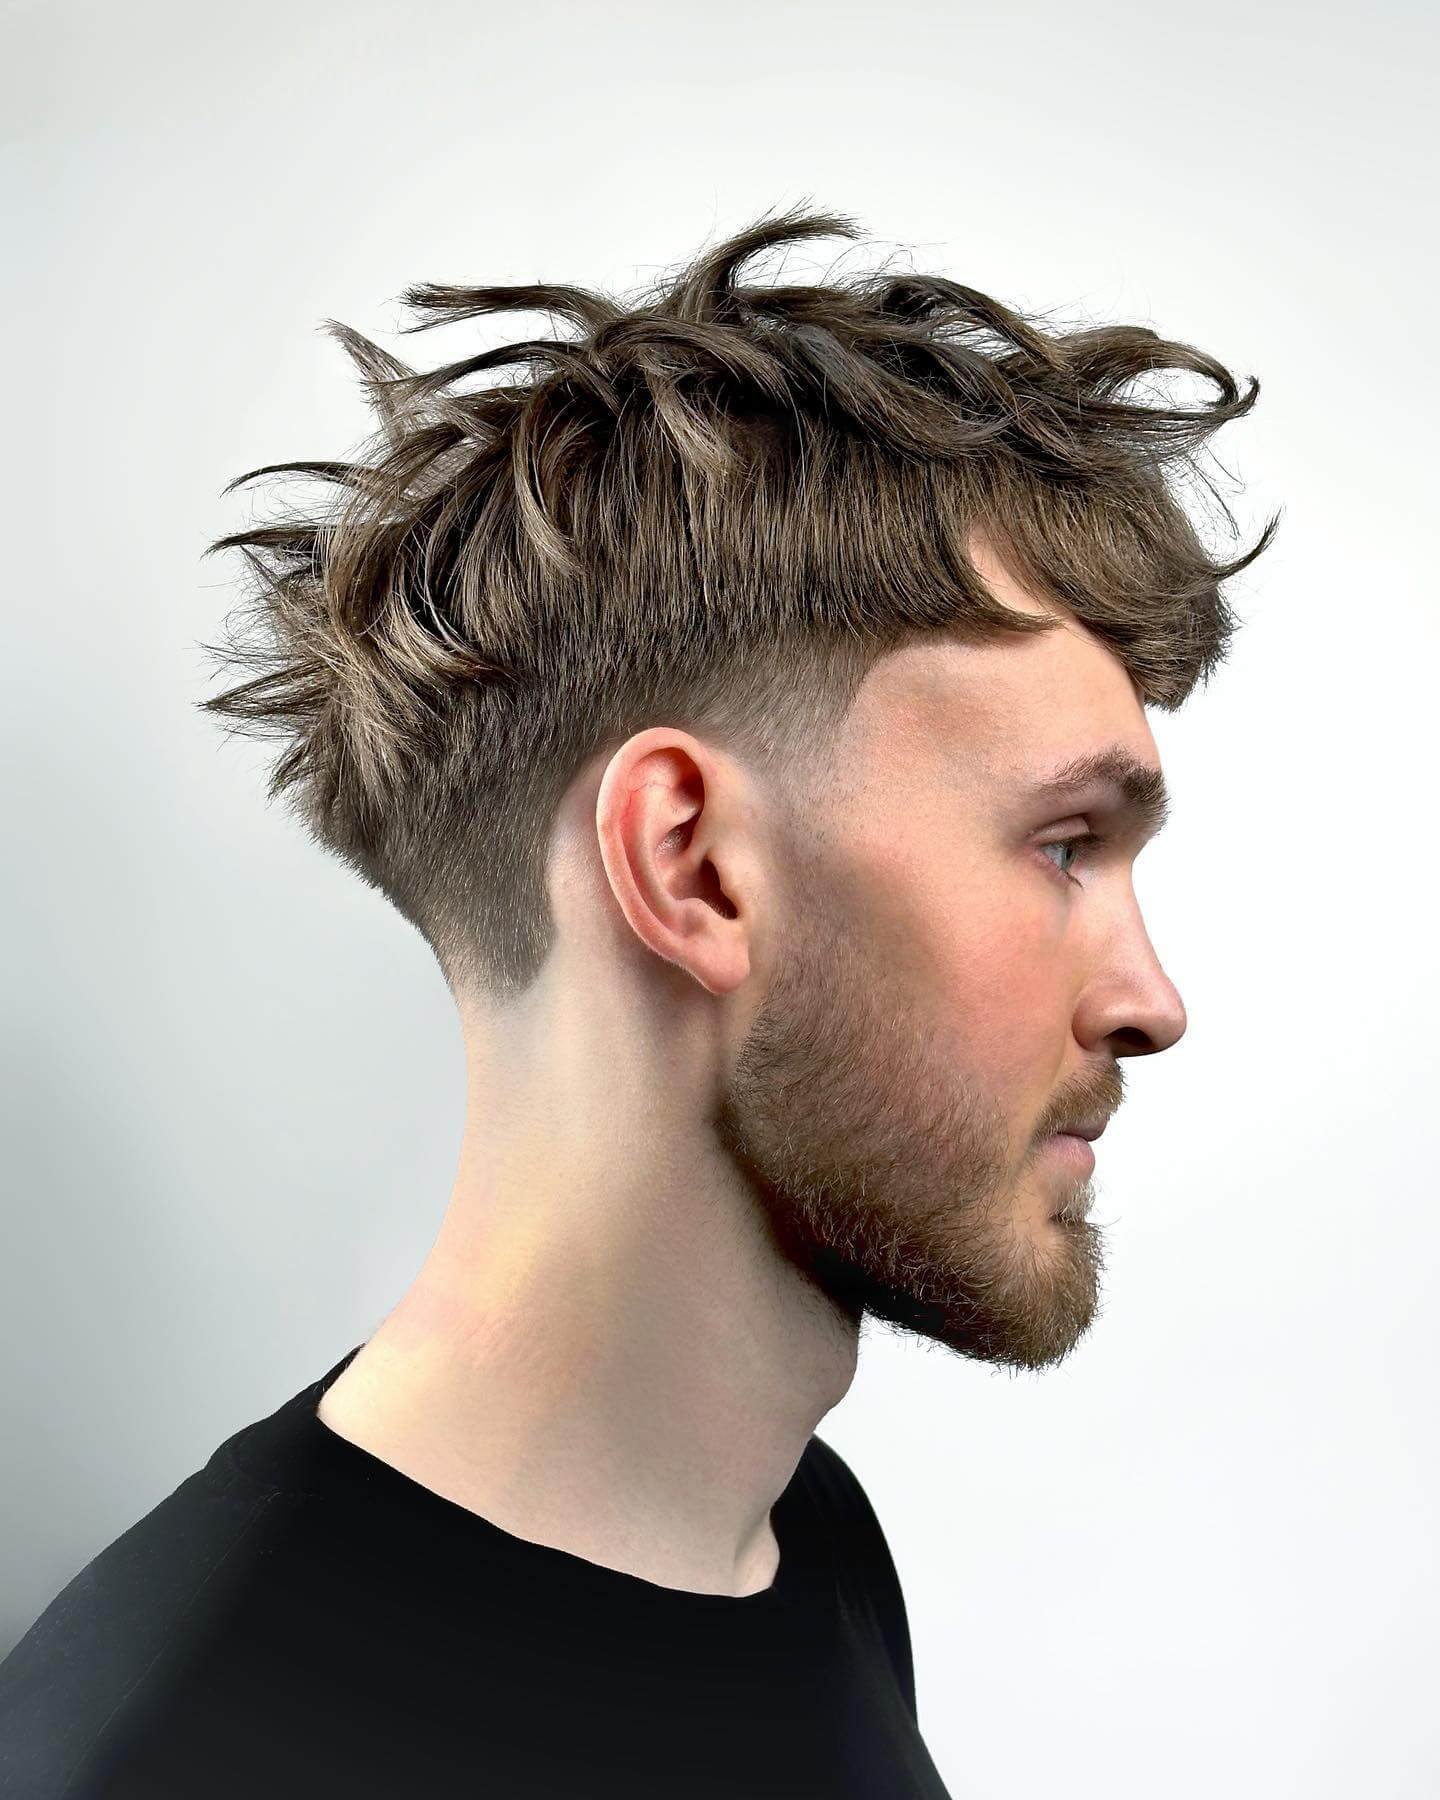 Tousled quiff men's hairstyles for thin hair
